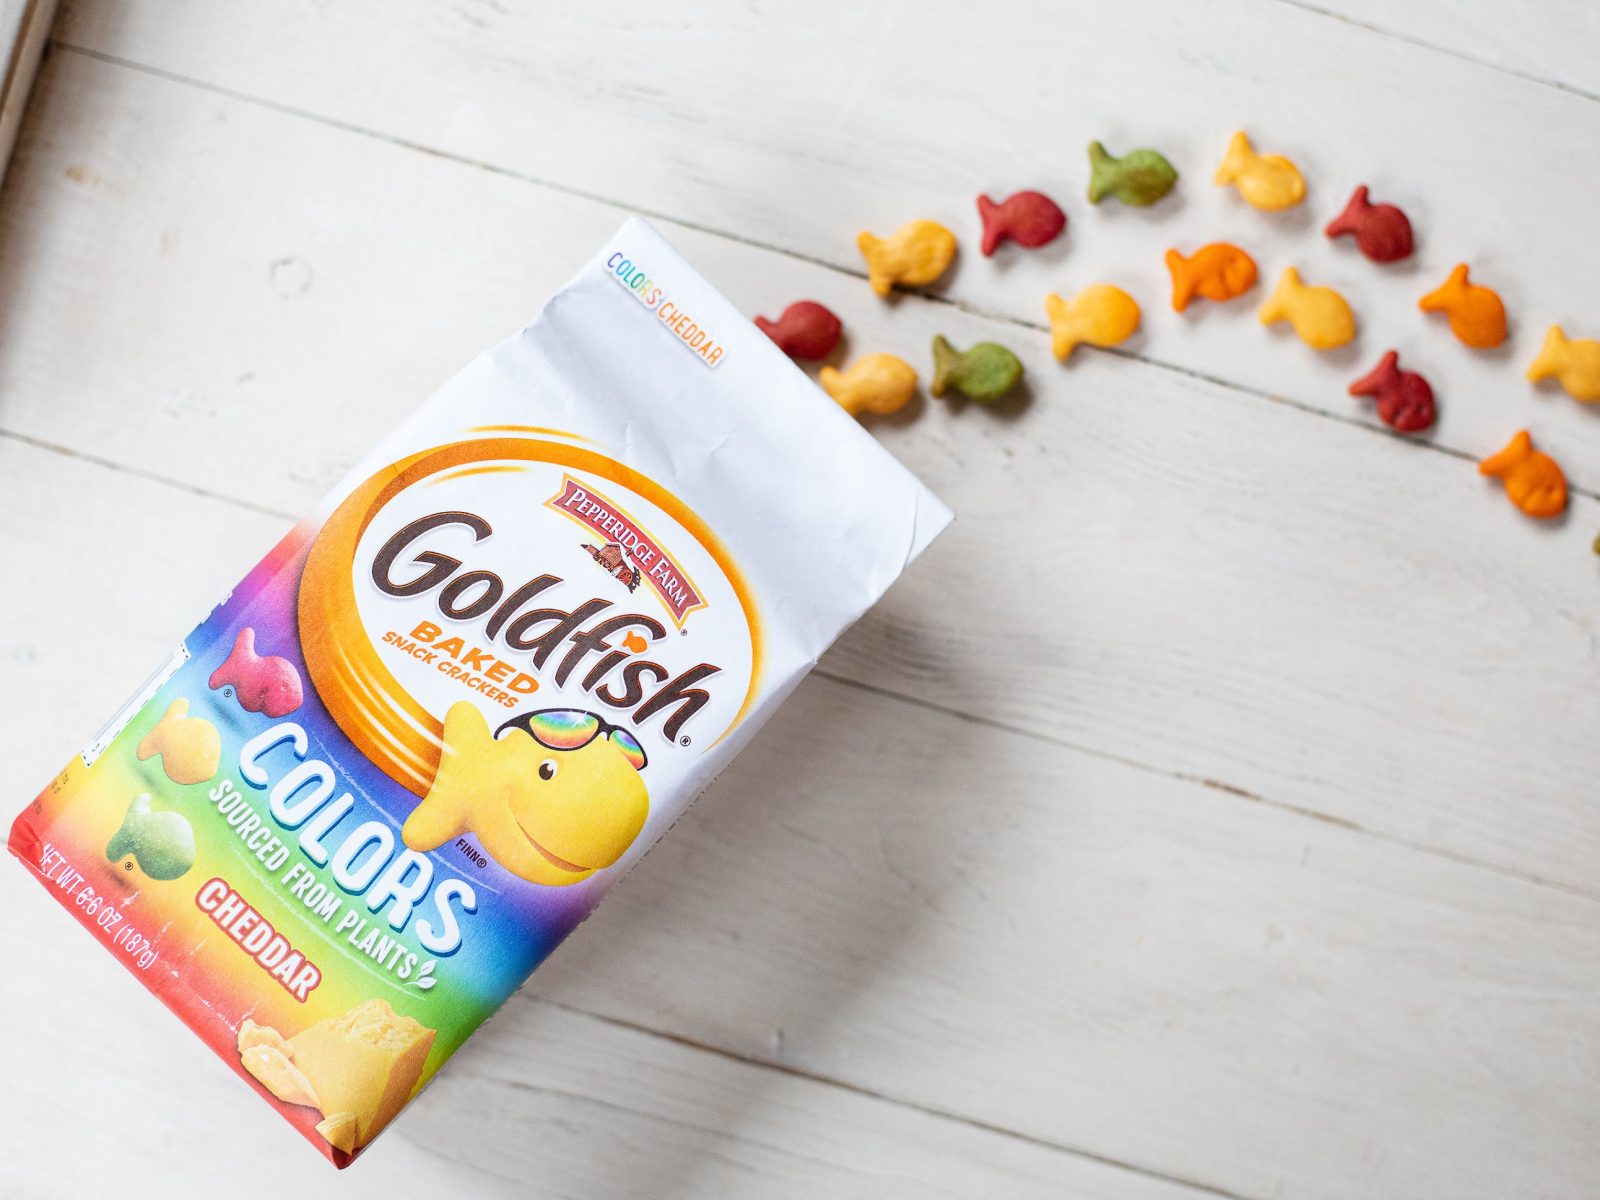 Goldfish Crackers As Low As $1.29 At Kroger